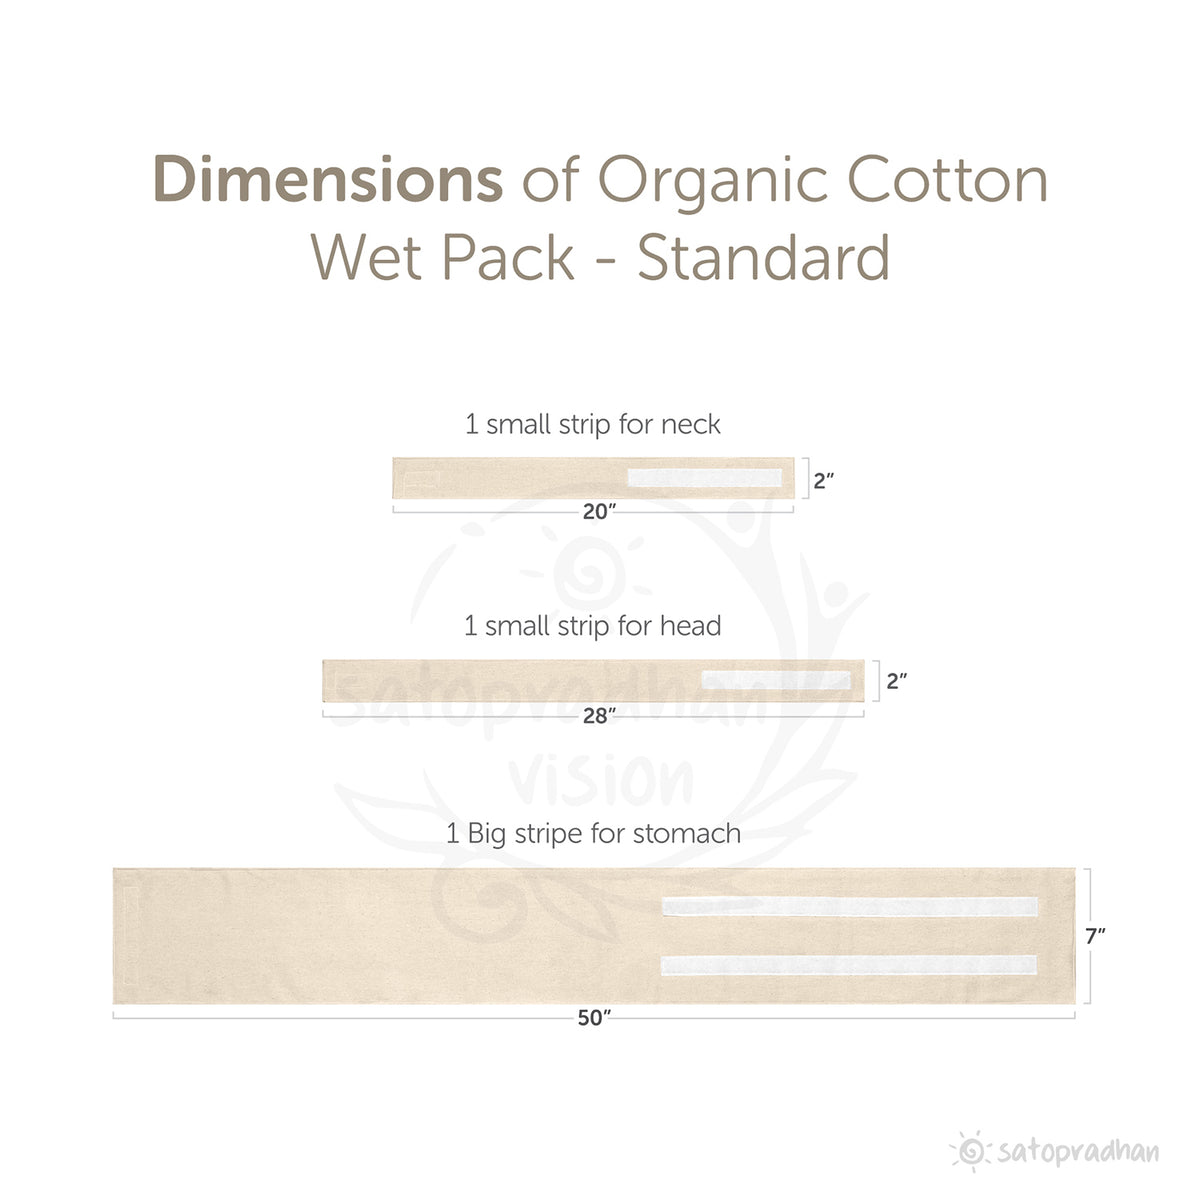 Organic Cotton Wet Pack - Standard Set of Three Cotton Stripes - Folded &amp; Stitched | GOTS Certified | Thandi Patti | Cure Cold, Cough, Fever, Stomach Ache Naturally